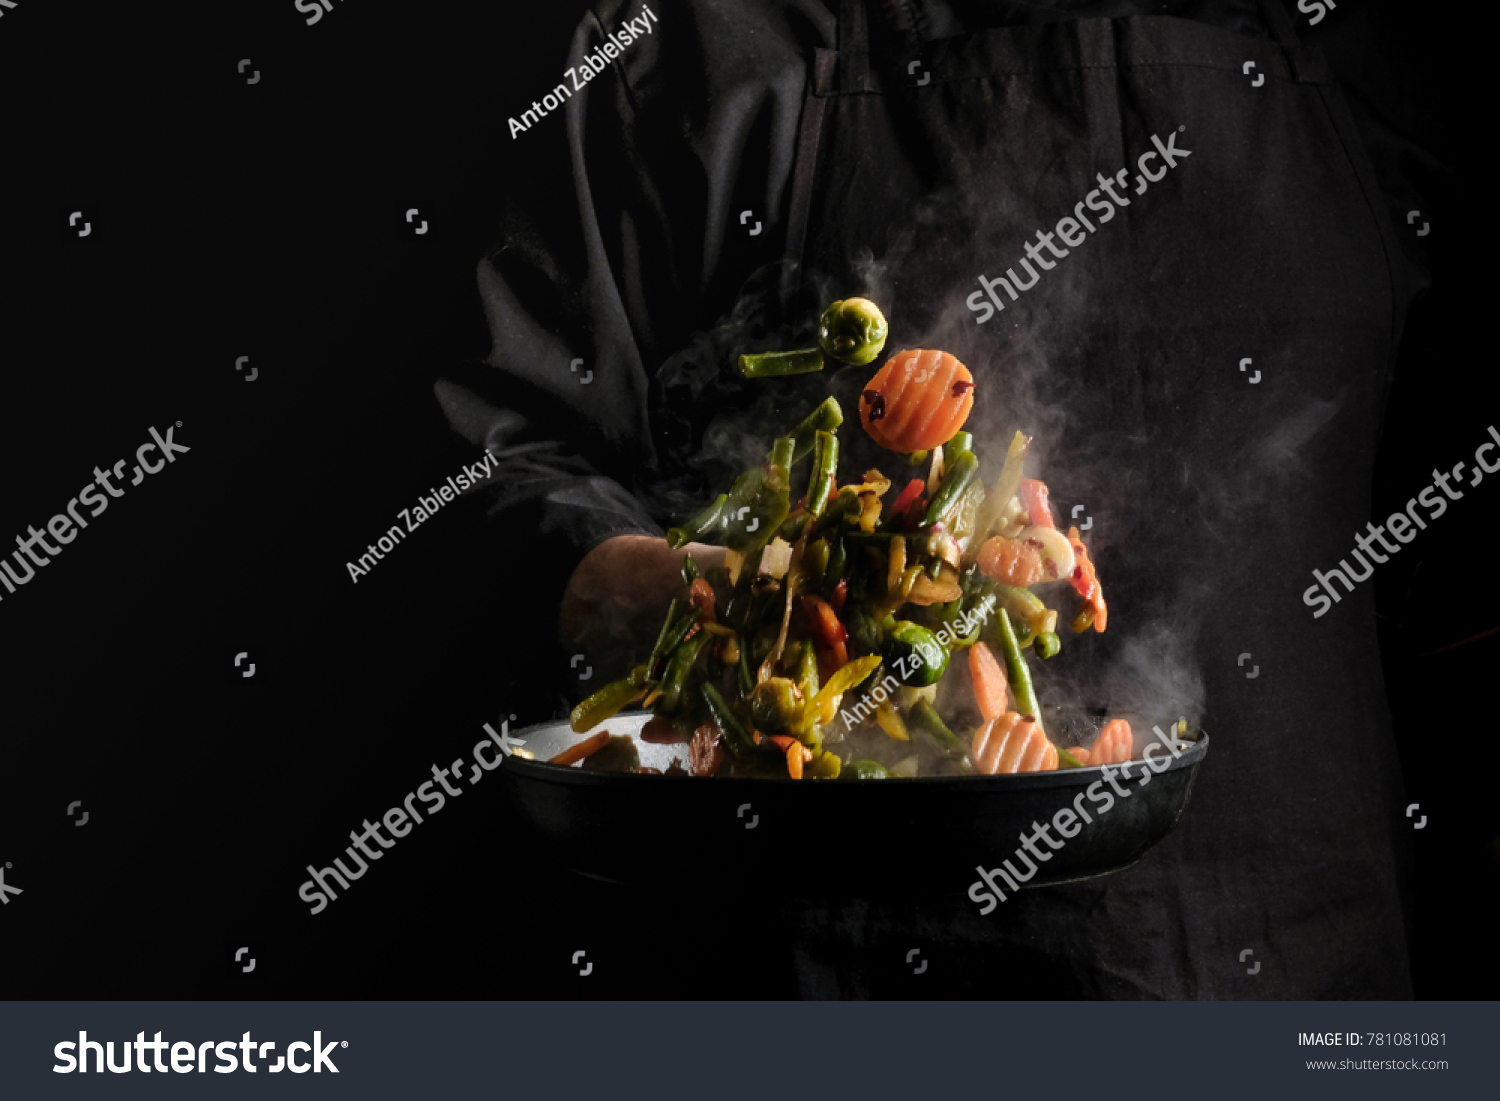 Chef cooking vegetables on a pan. Black background for copy text. #781081081